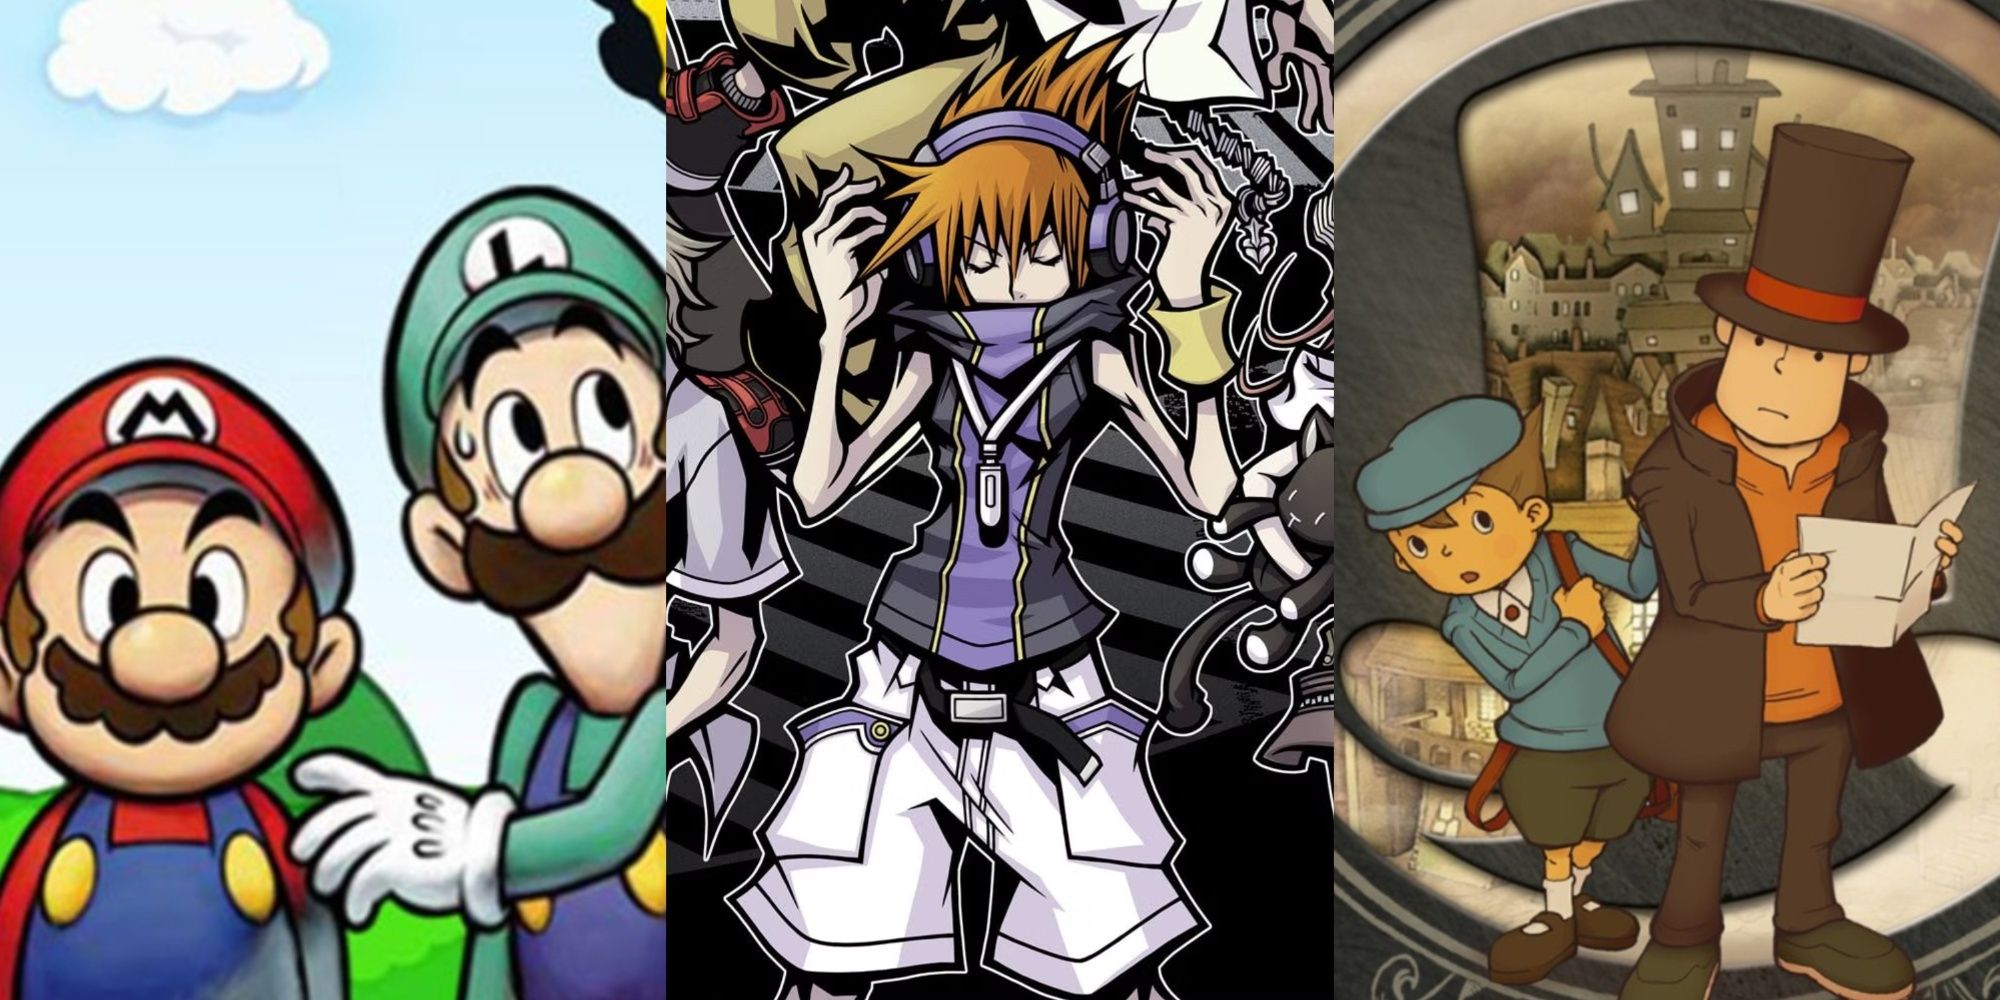 Split images of Mario & Luigi Bowser's Inside Story, The World Ends With You, and Professor Layton and the Curious Village